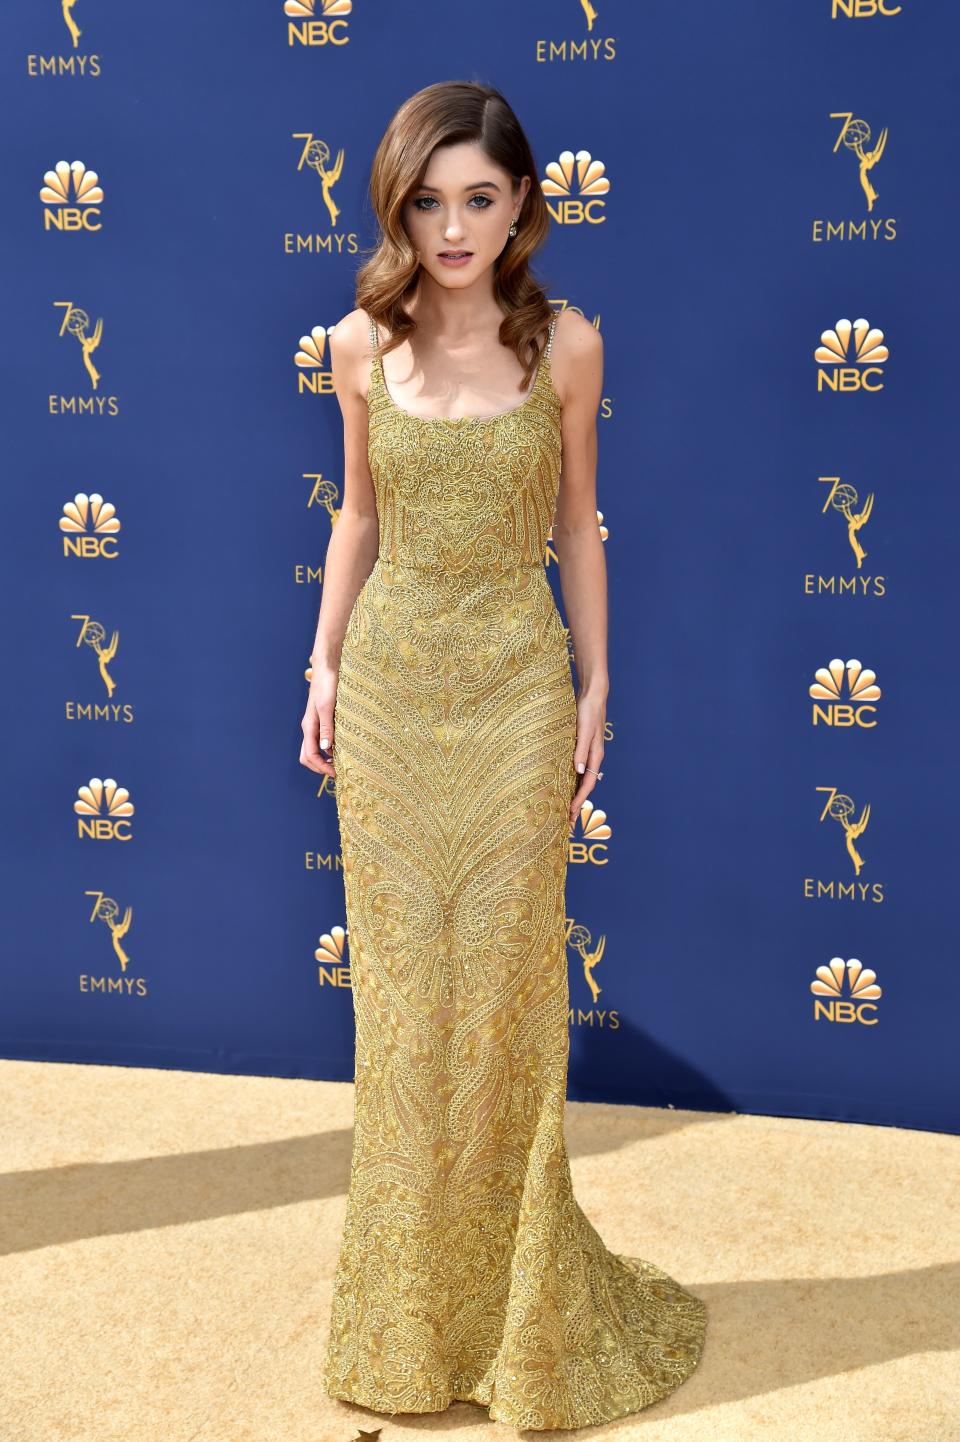 LOS ANGELES, CA - SEPTEMBER 17:  Natalia Dyer attends the 70th Emmy Awards at Microsoft Theater on September 17, 2018 in Los Angeles, California.  (Photo by Jeff Kravitz/FilmMagic)